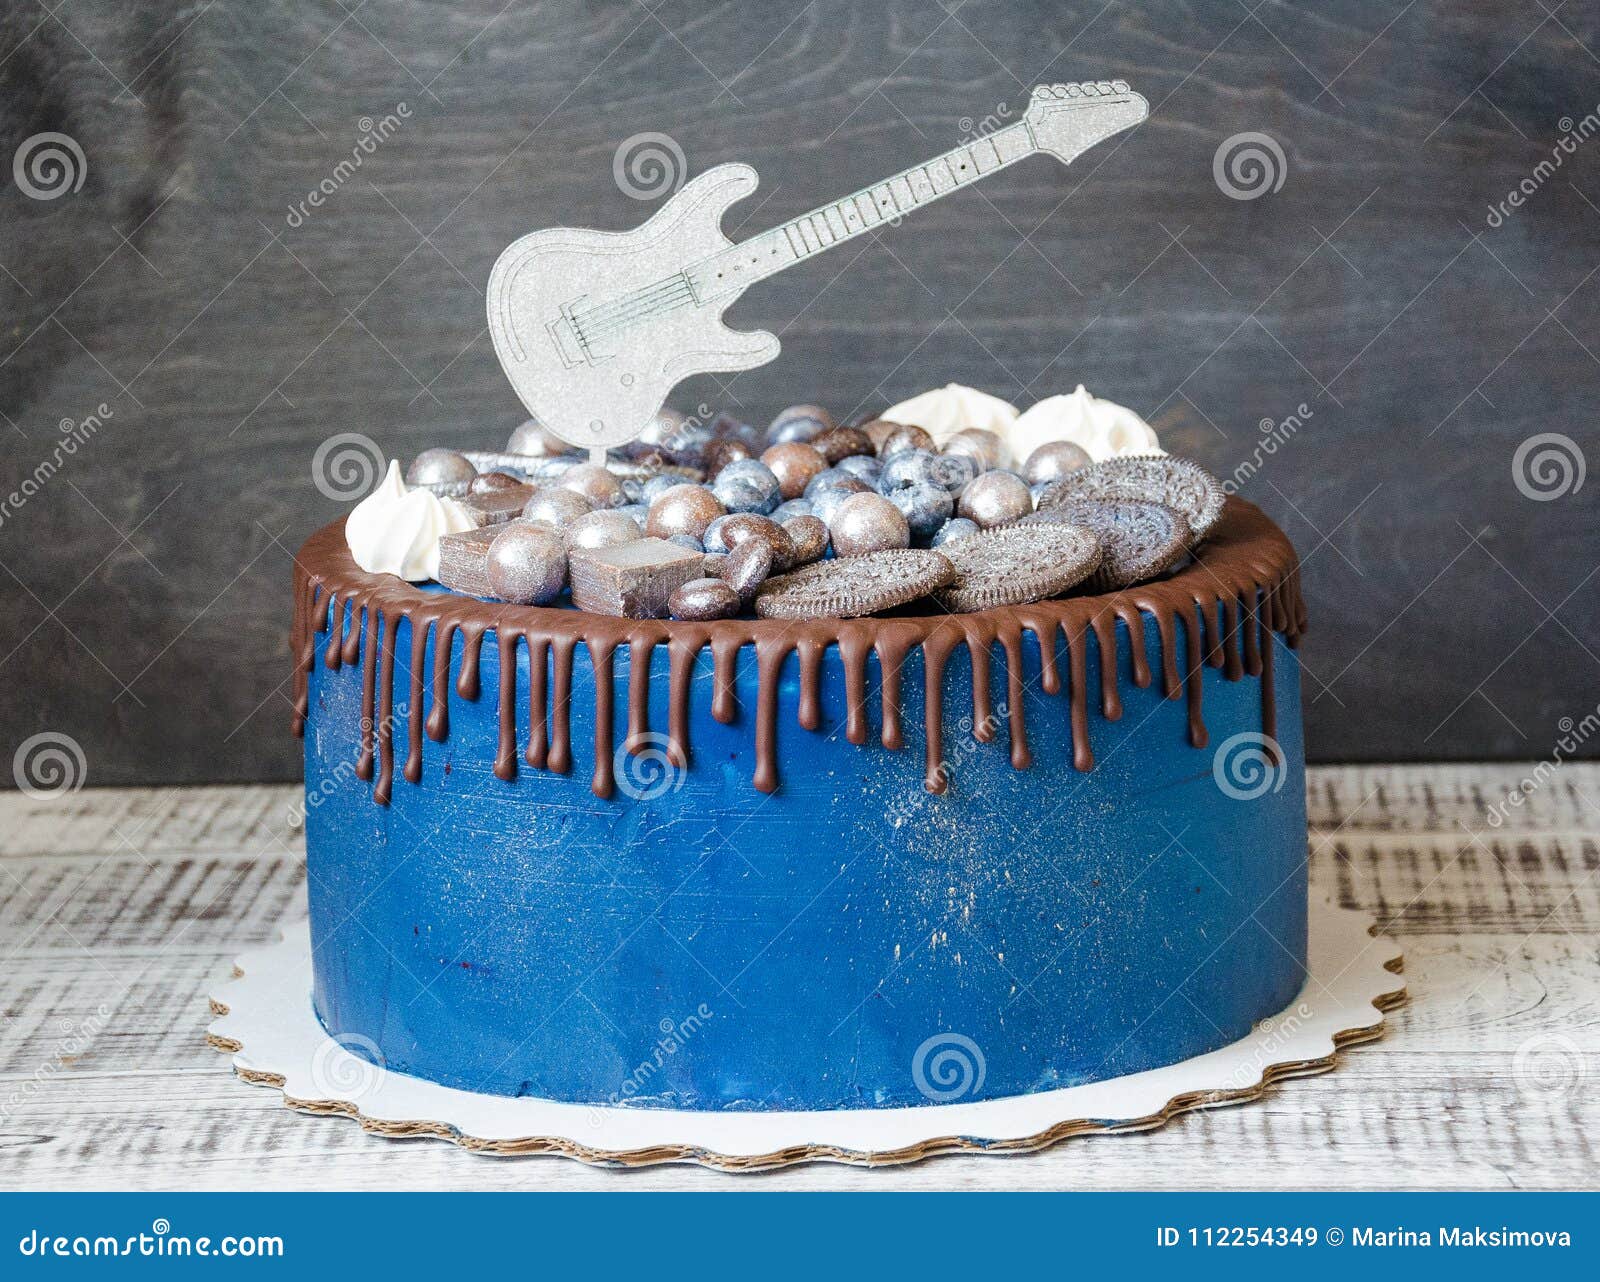 Fashion and Guitar theme cake - Birthday Cake for Girlfriend – Creme Castle